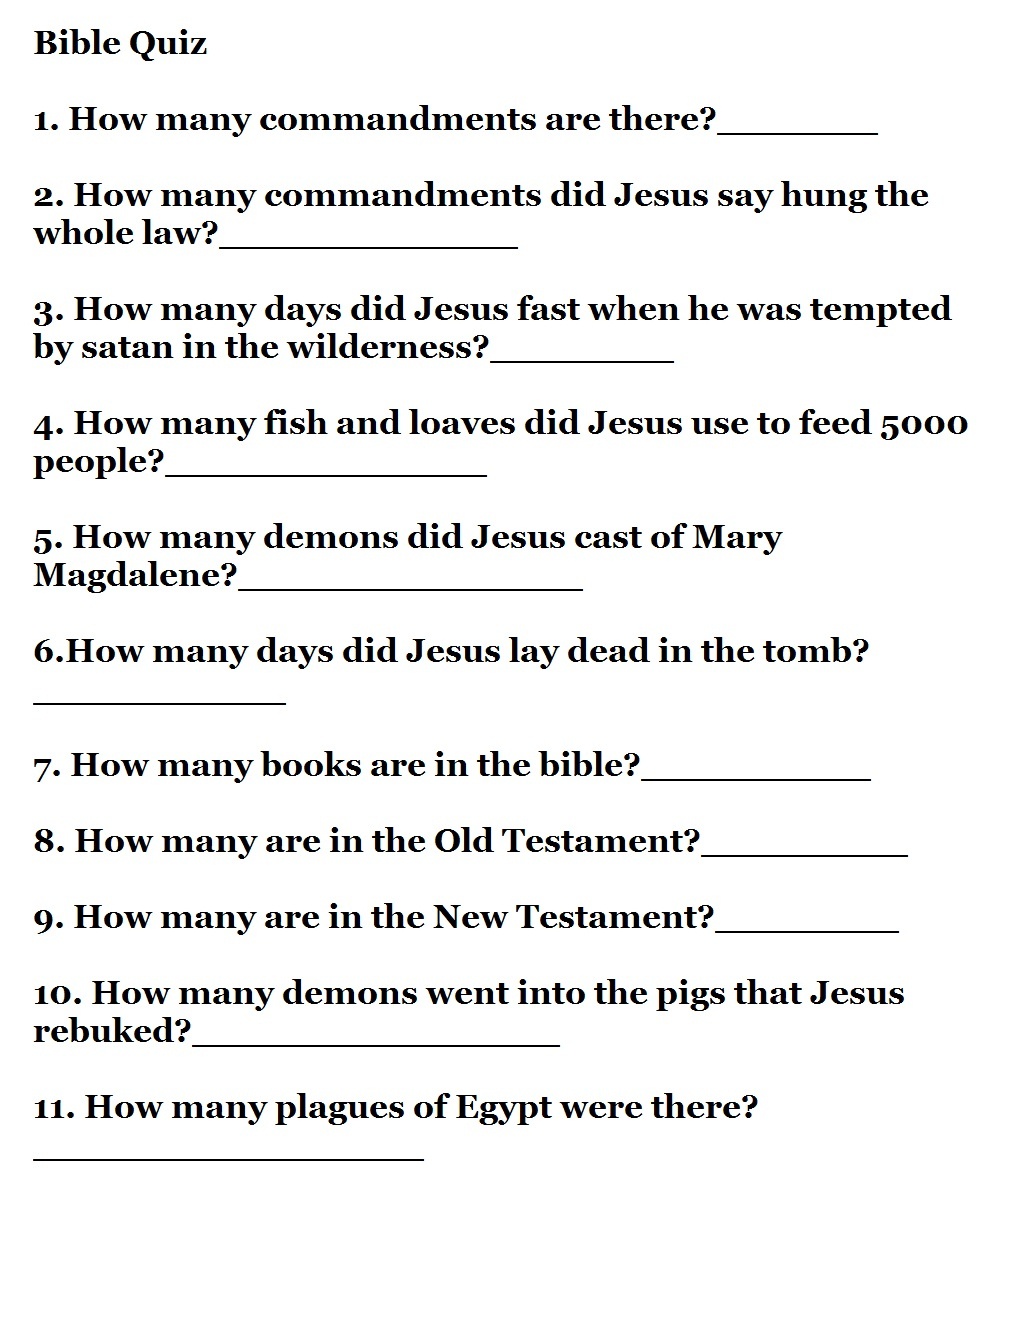 christian-christmas-trivia-questions-and-answers-bible-quiz-questions